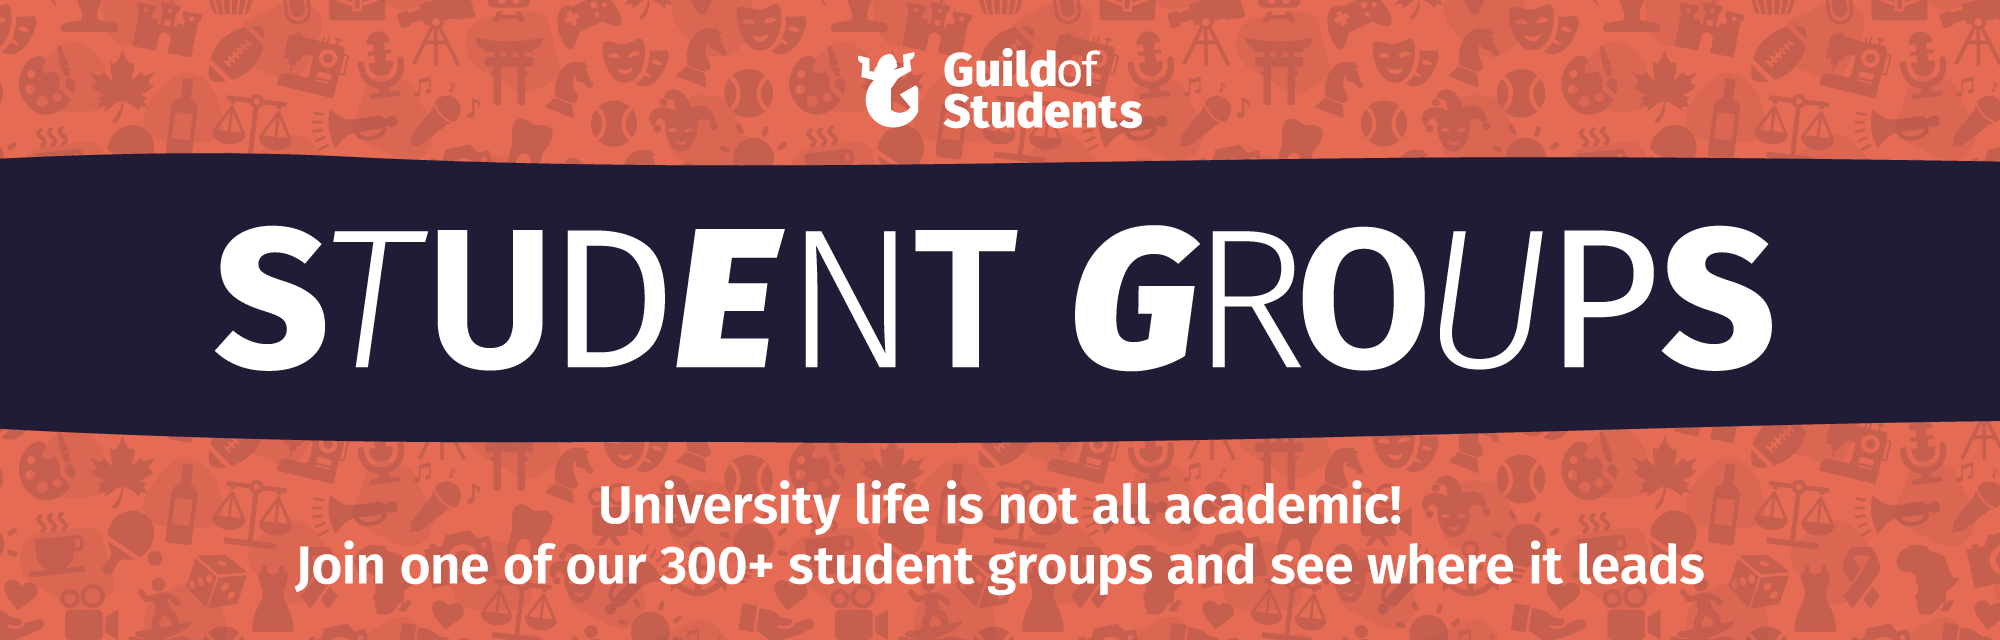 Student Groups